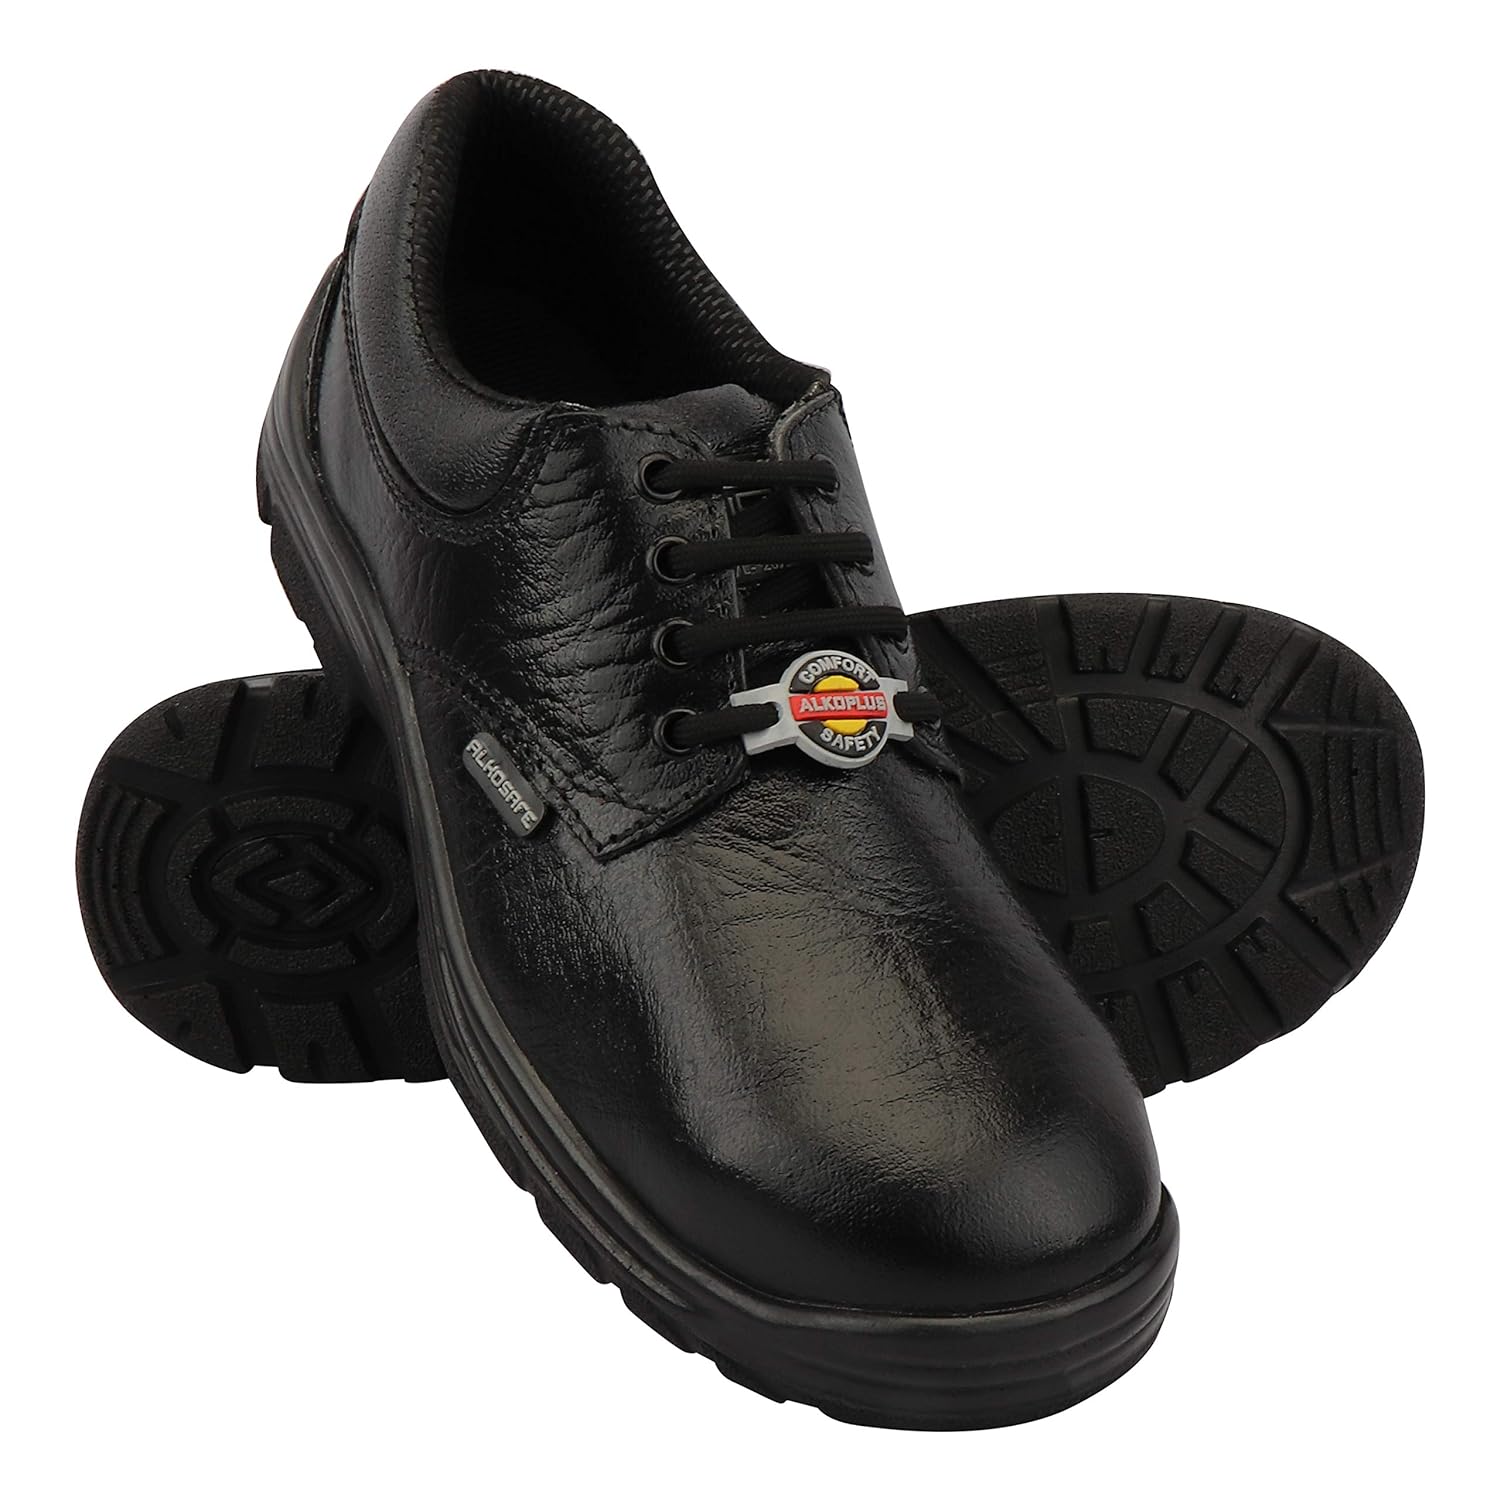 ALKO PLUS APS-1052 Full Grain Leather Steel Toe Safety Shoes Black_0